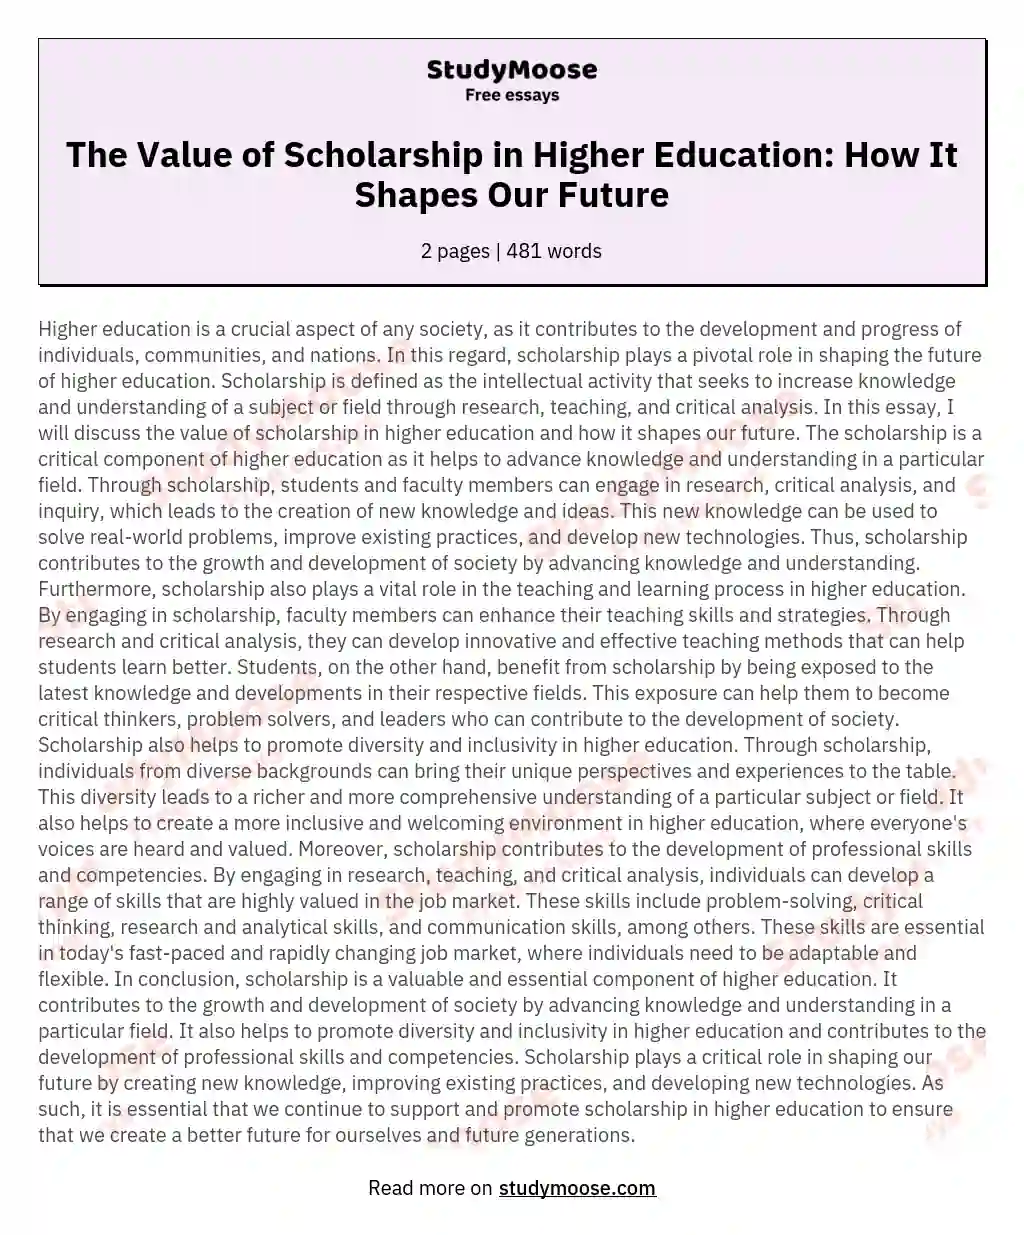 The Value of Scholarship in Higher Education: How It Shapes Our Future essay